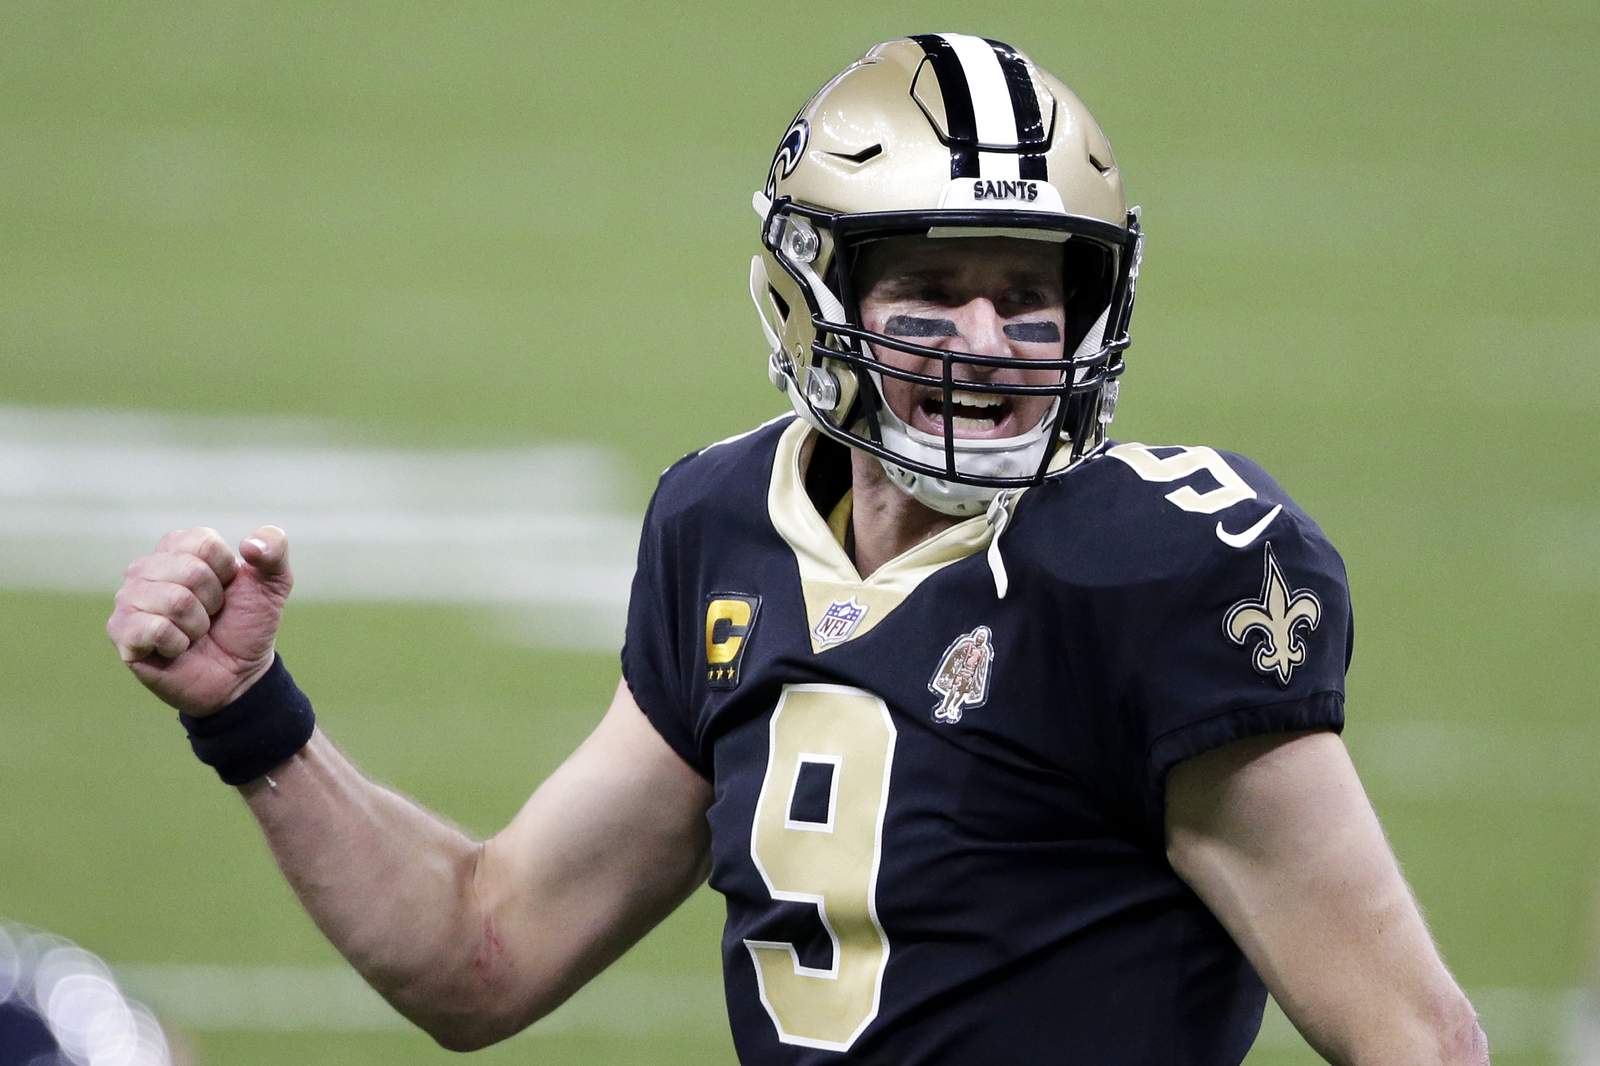 Saints' Brees sees playoff clash with Brady's Bucs as fate